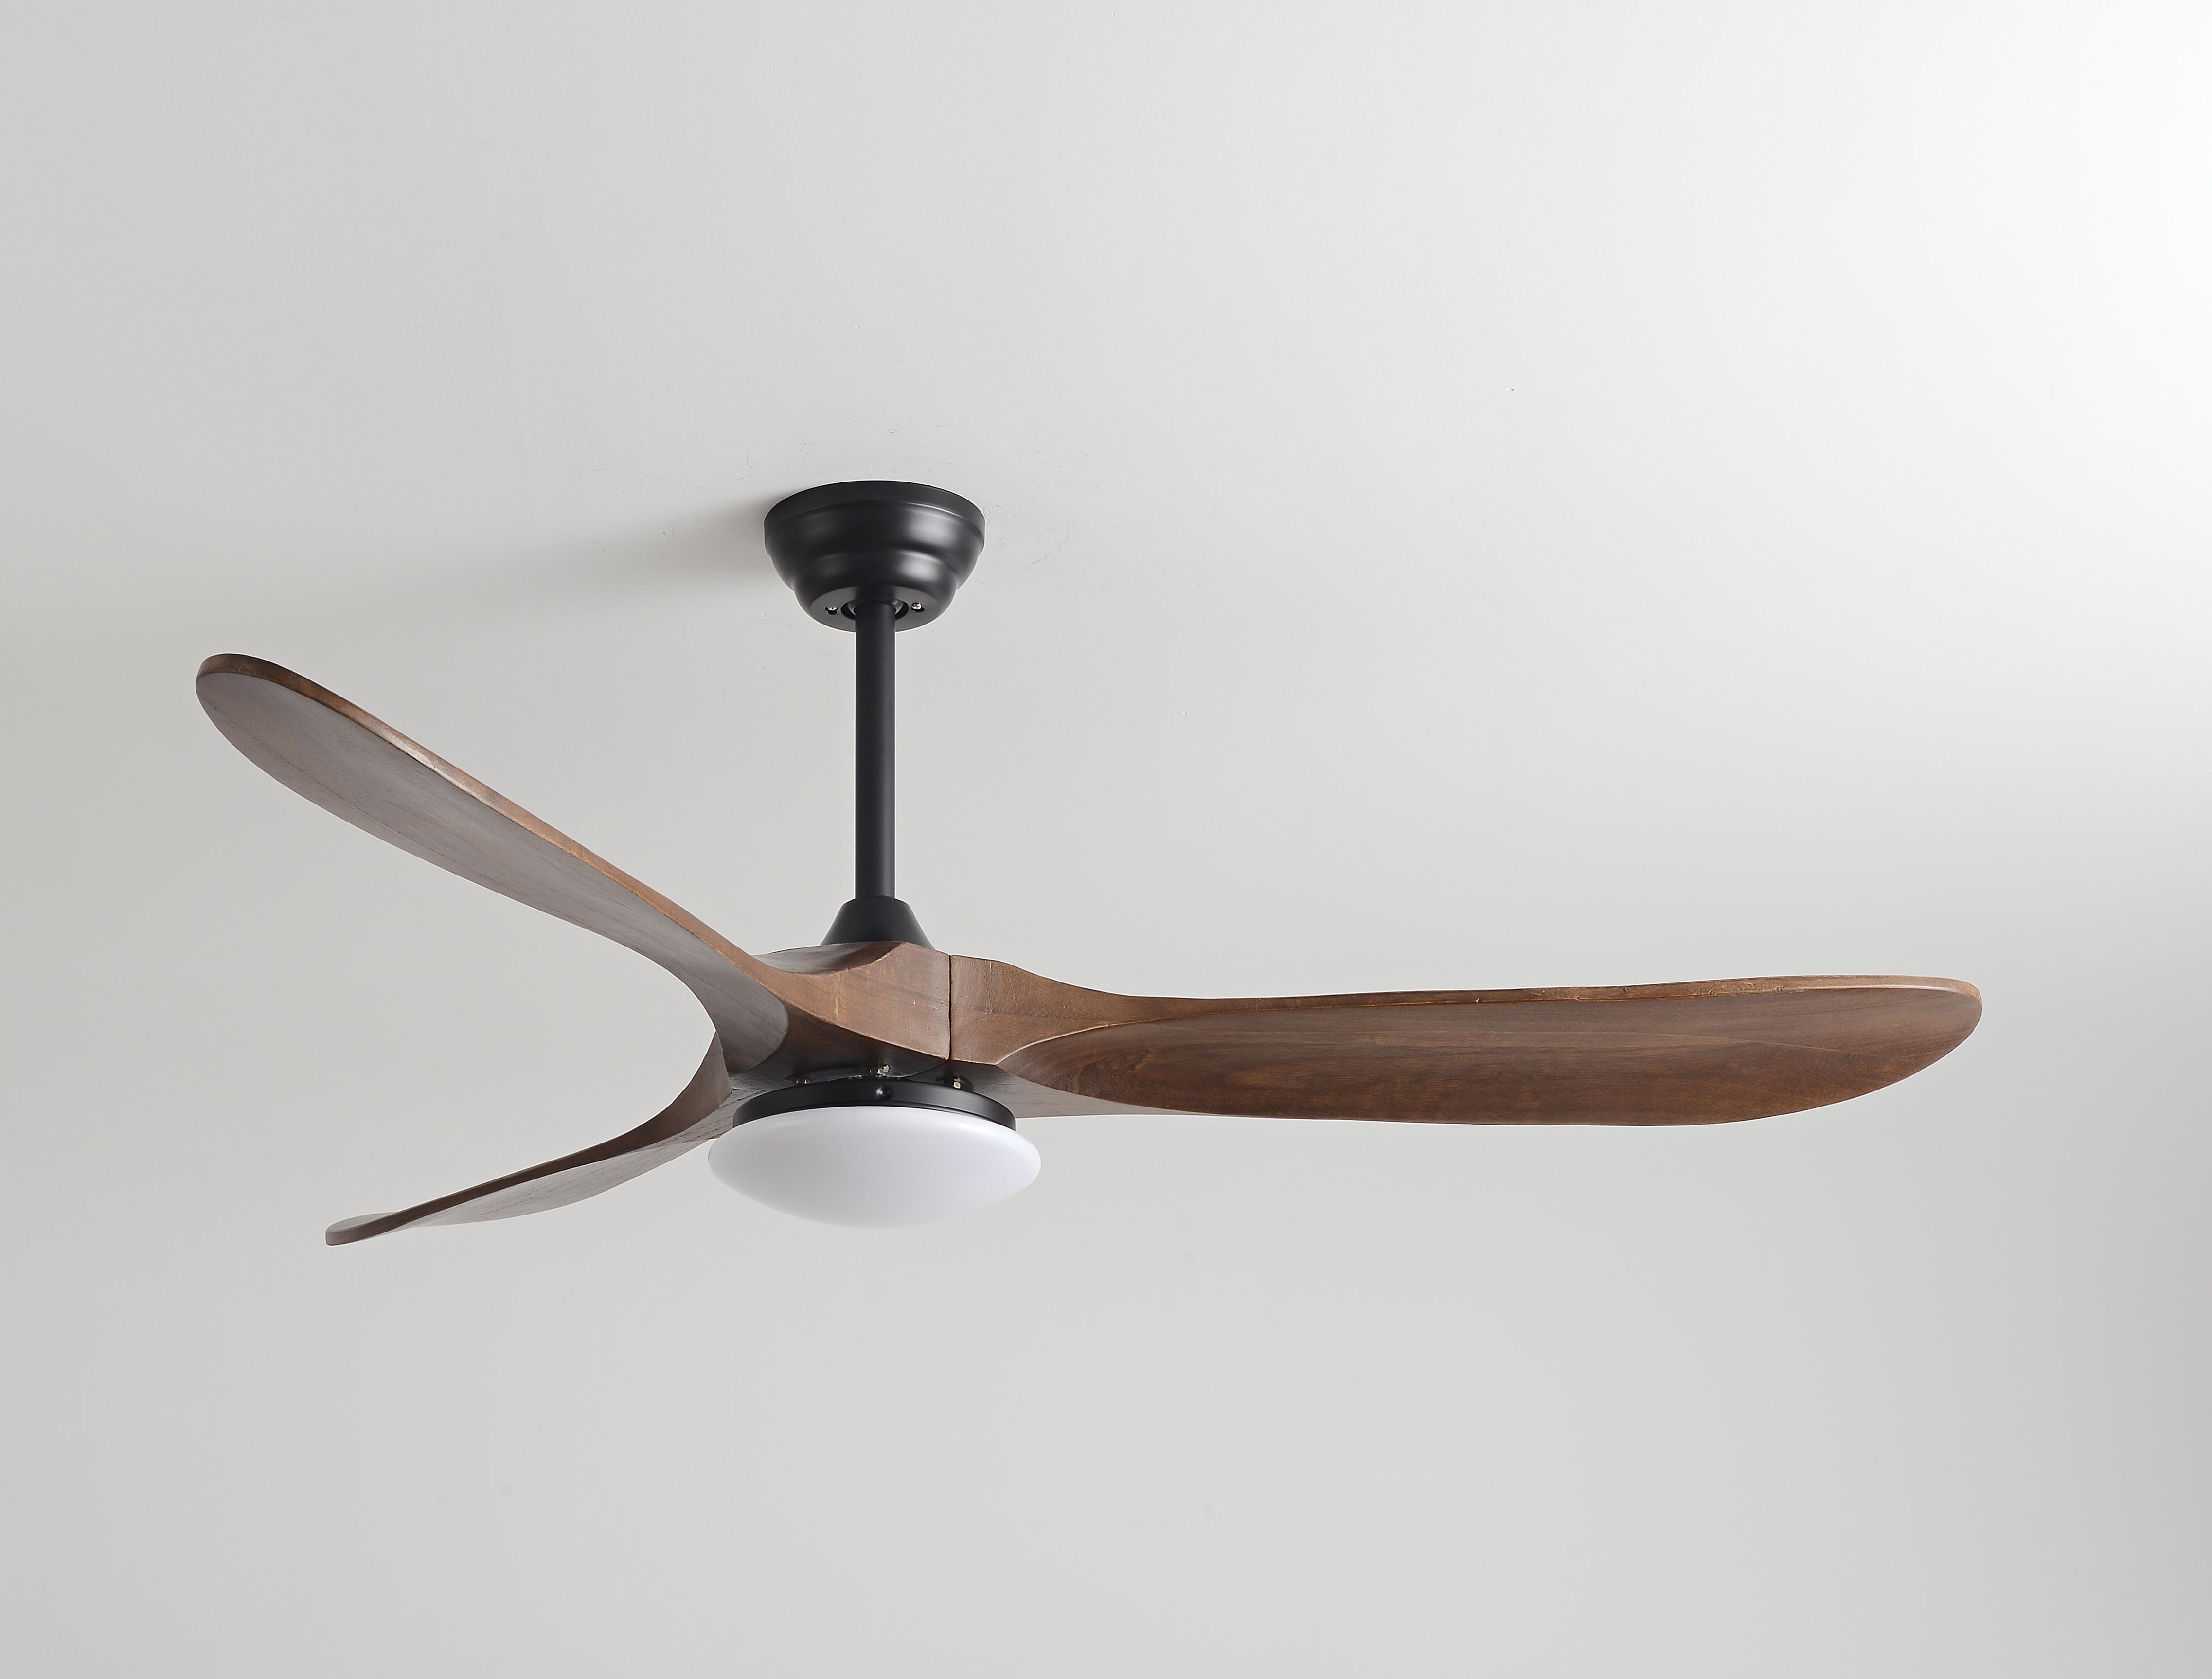 52 inch Modern 3 leaf smart bldc remote control fancy wood ceiling fan with light or without lights